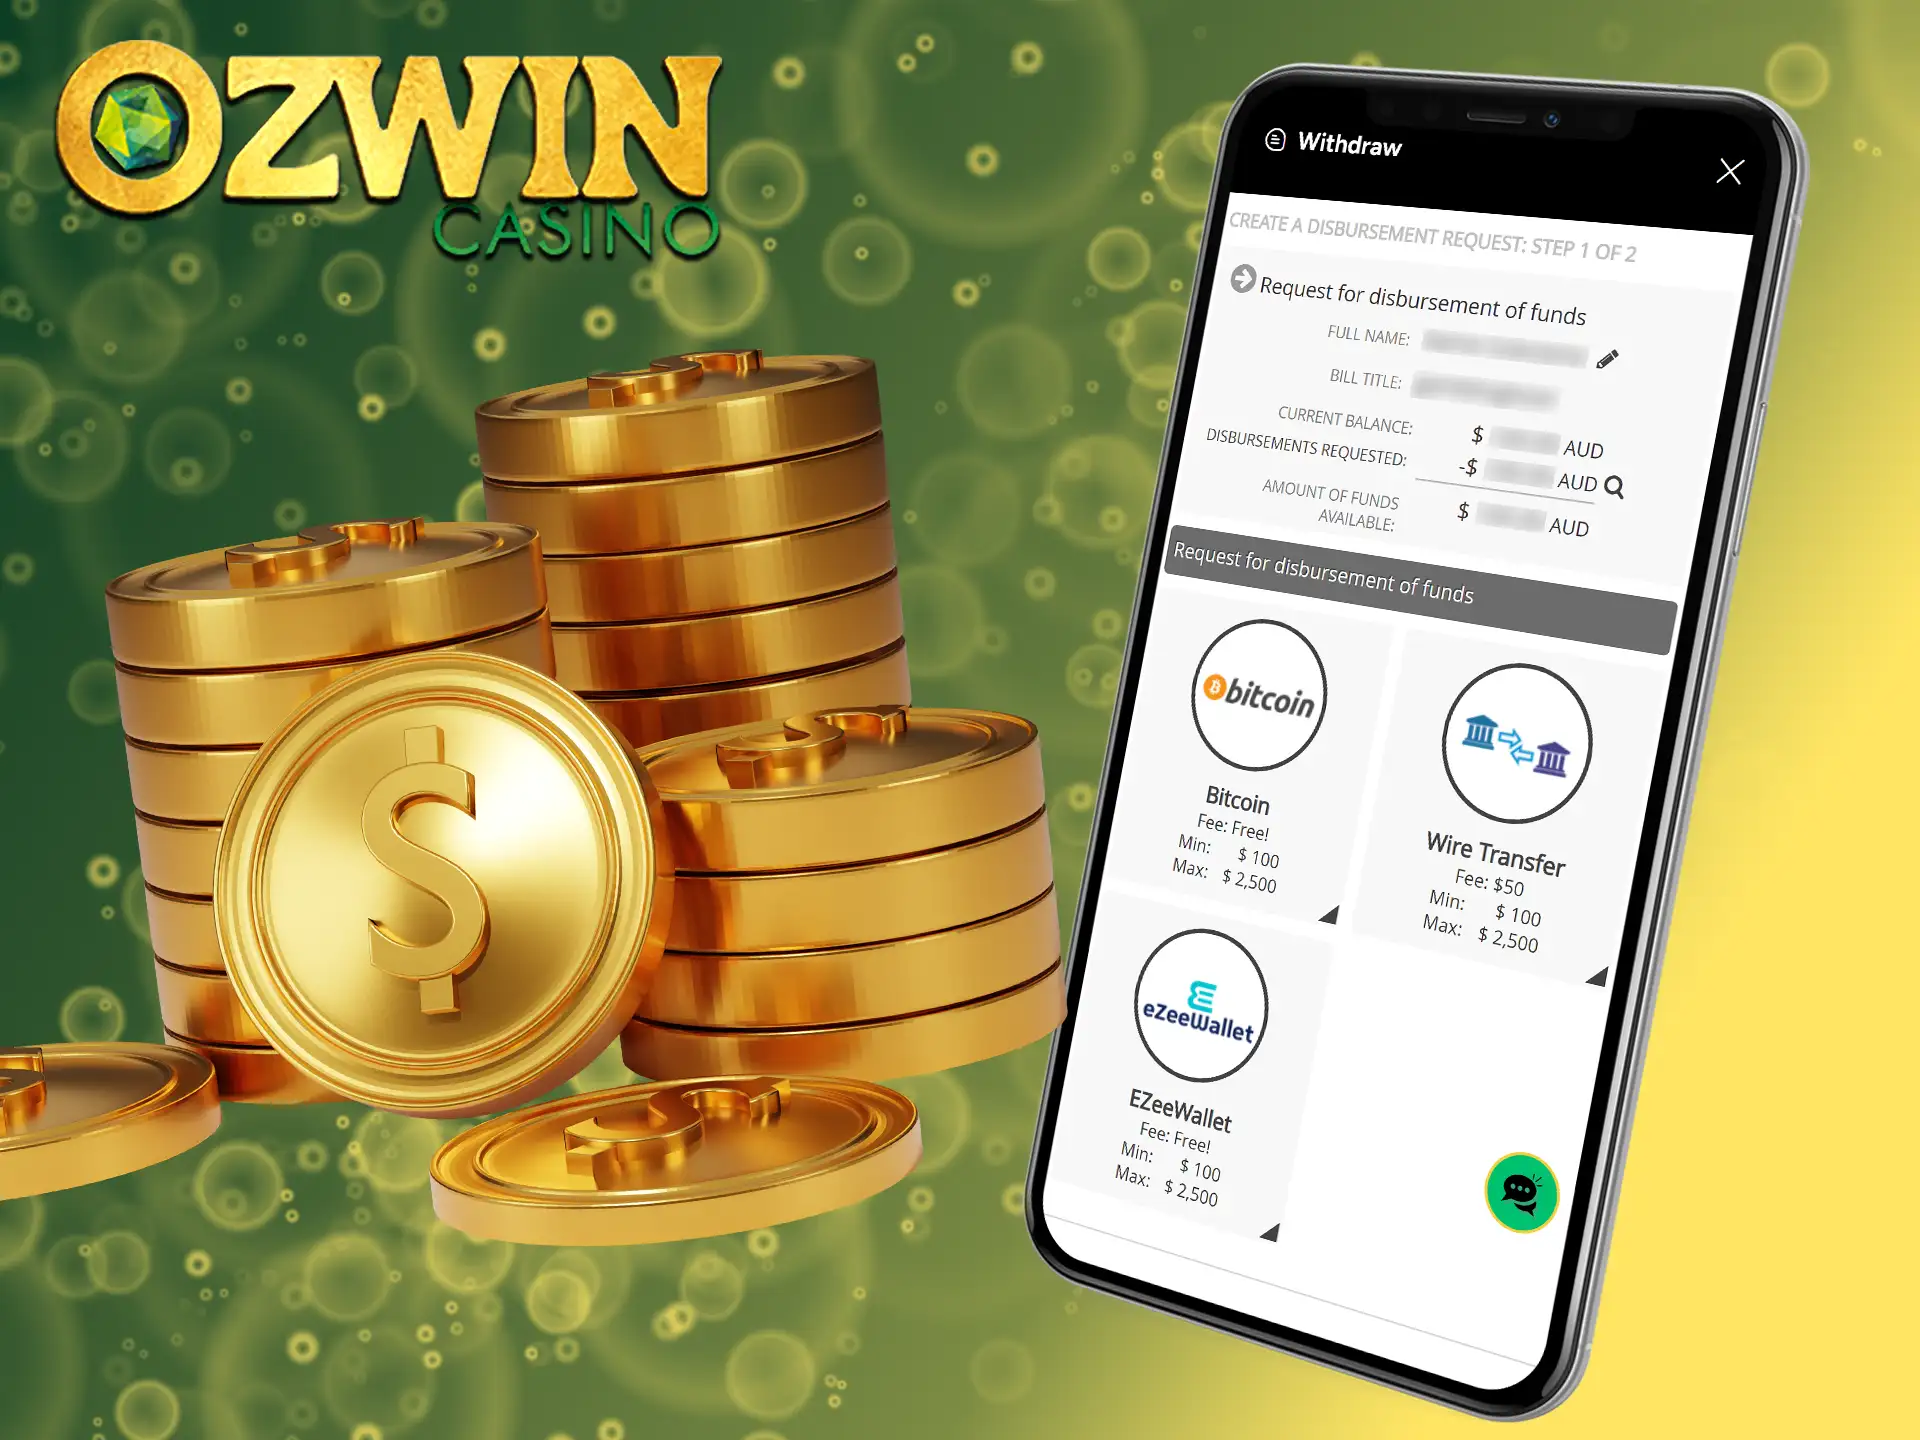 Ozwin Casino offers a smooth withdrawal process.